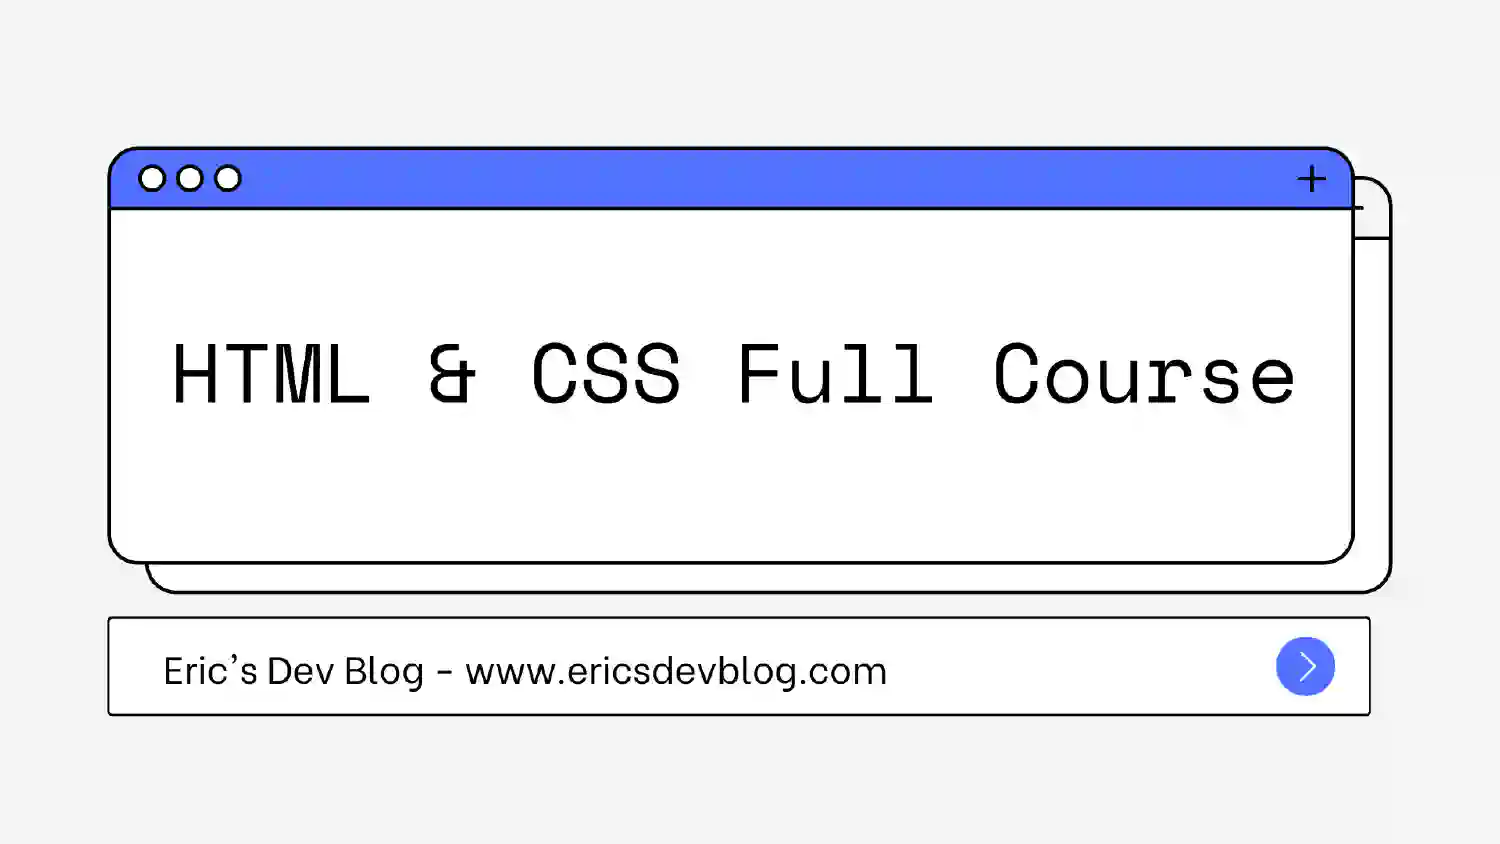 HTML & CSS: A Practical Guide